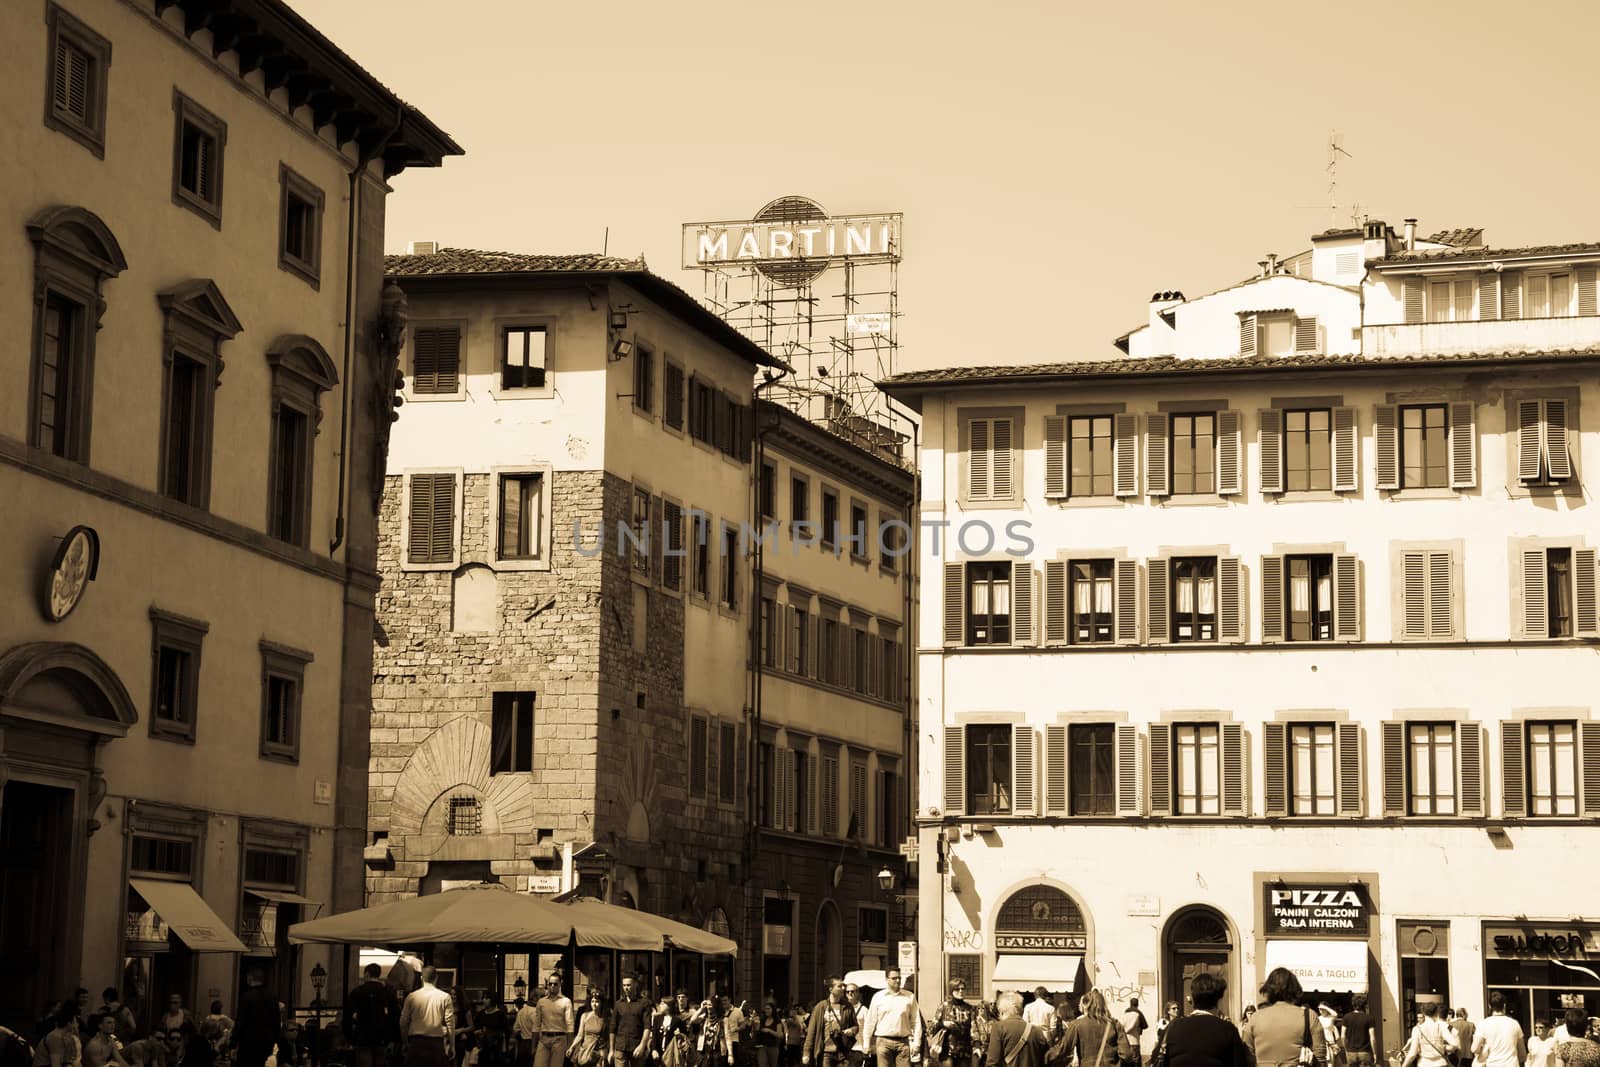 Florence, Italy- April 21;: Florence, Italy as it would have been, people going about their day crowd the street in bottom while typically Italian urban architecture and iconic signs complete the picture.